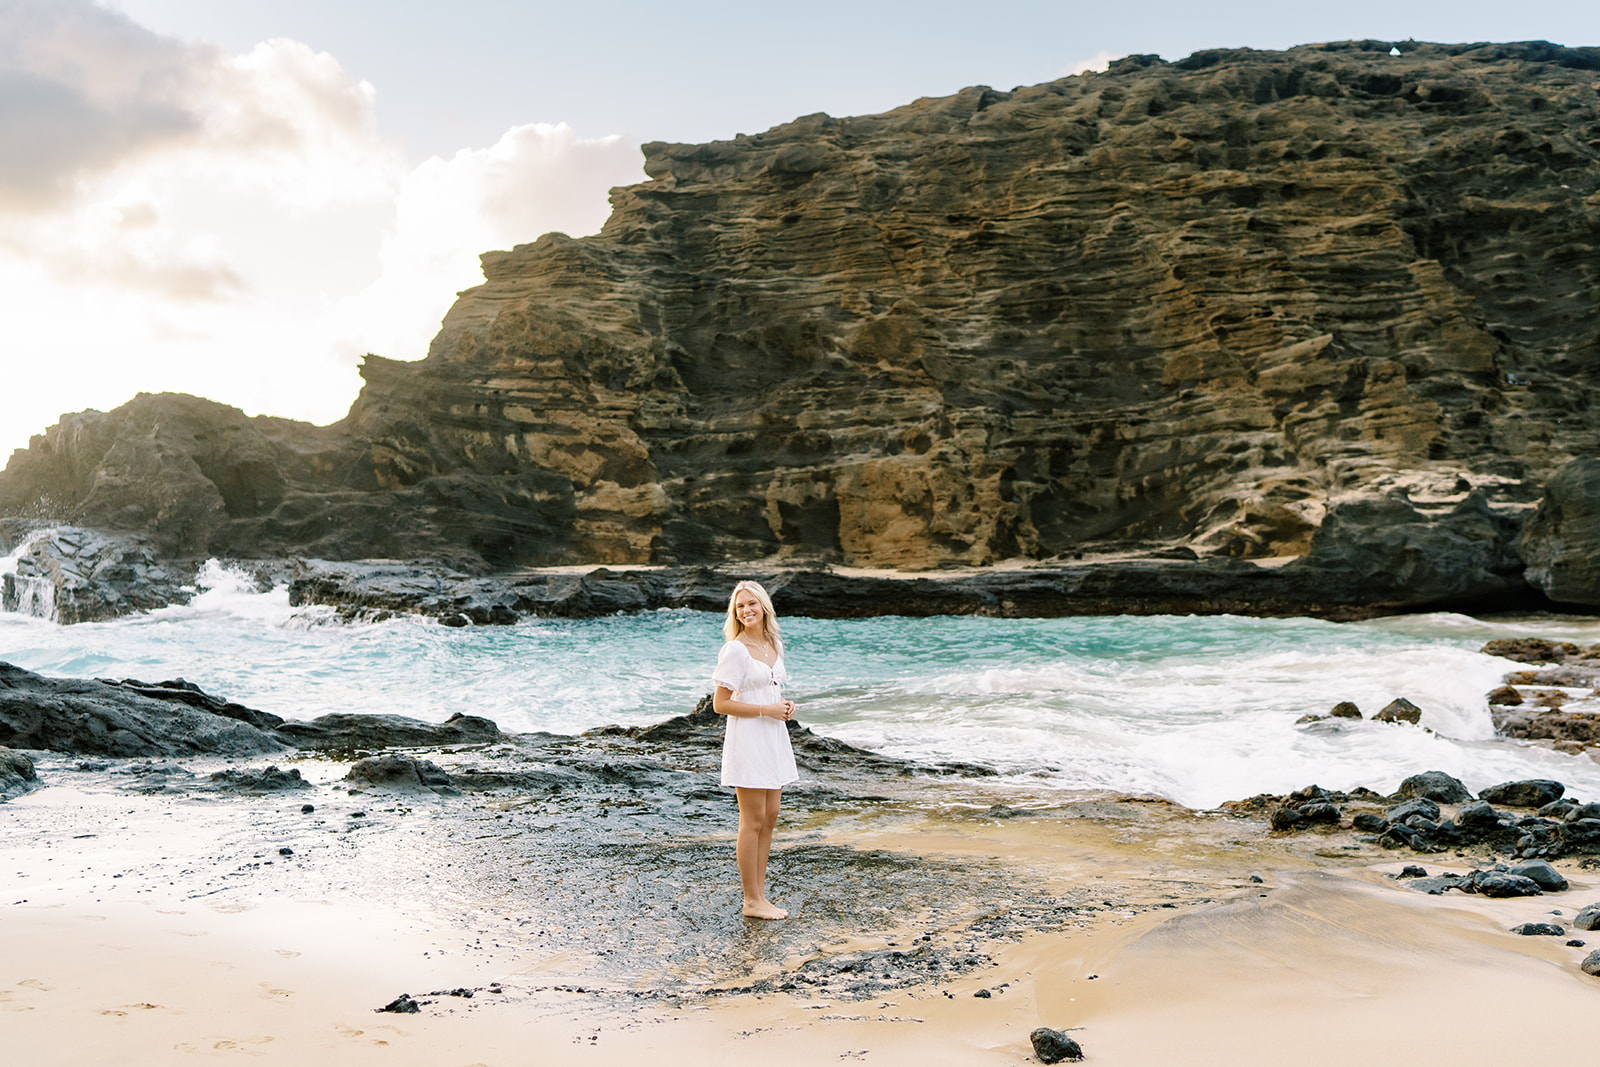 A woman in a white dress stands on a sandy beach with rocky cliffs and waves Portrait session at Halona Cove